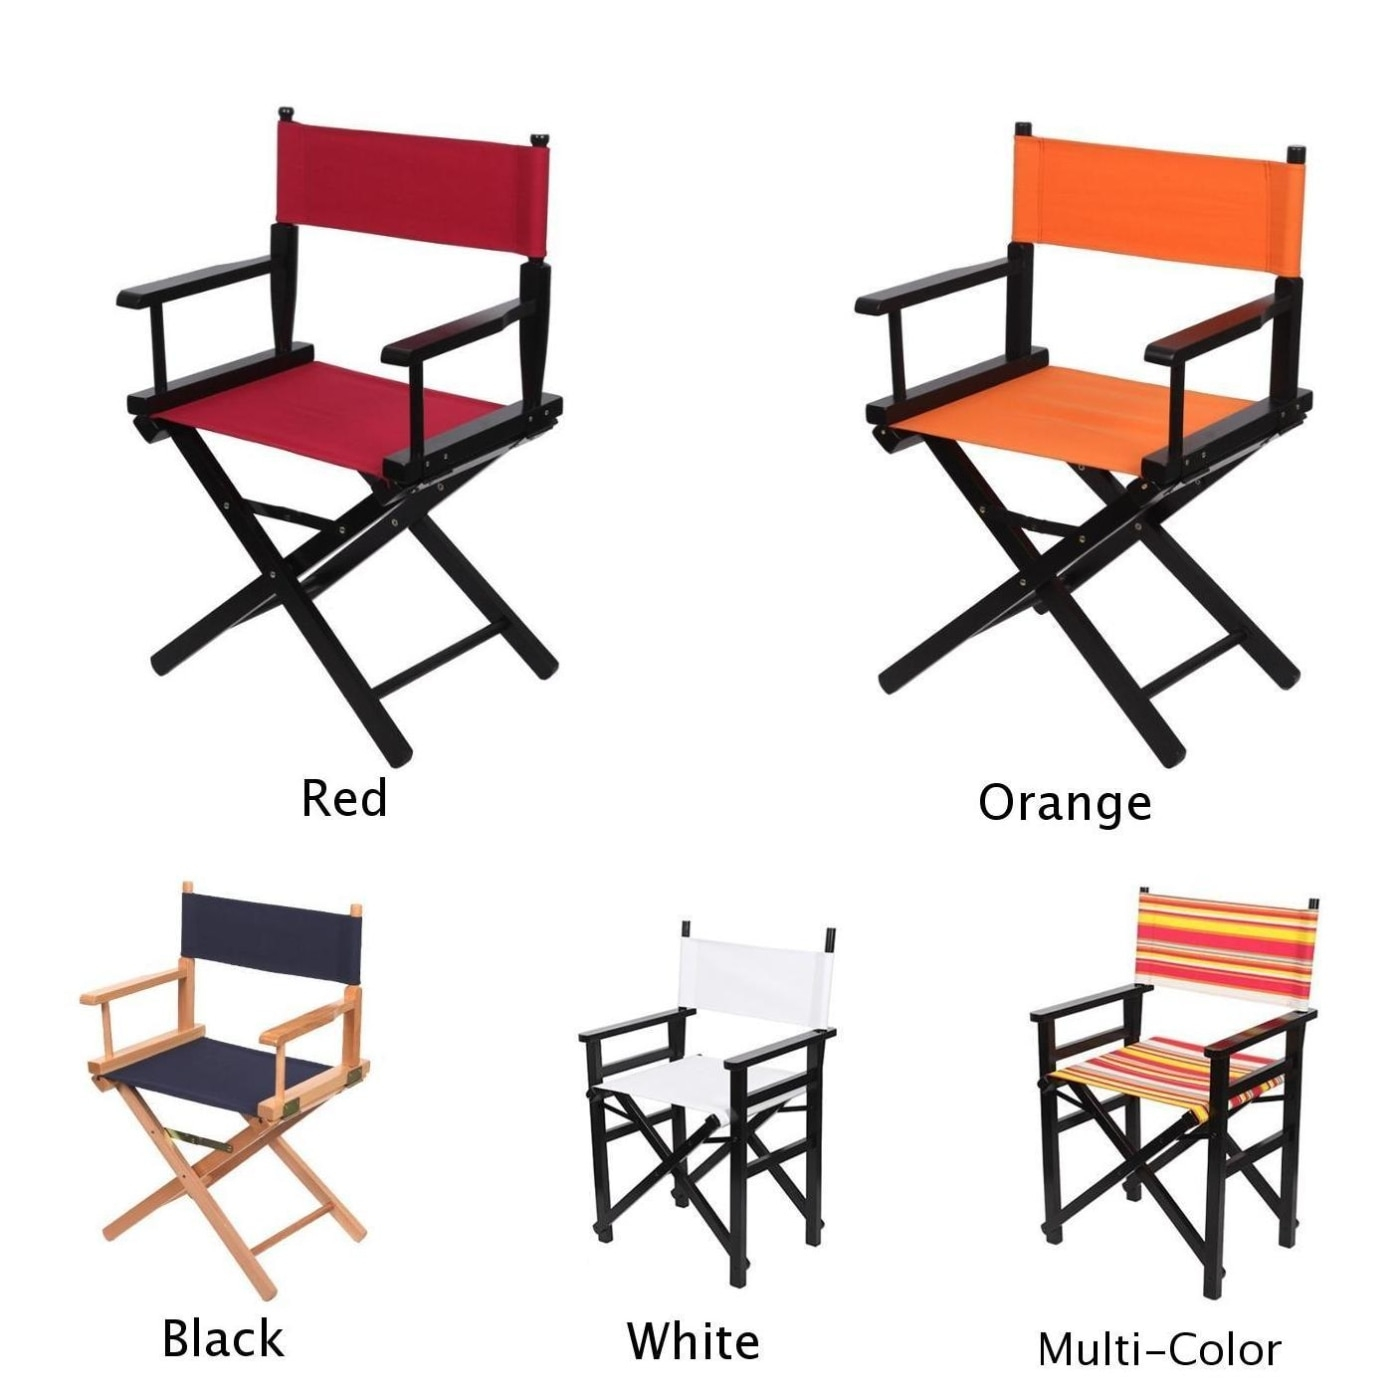 Us 65 26 Offoutdoor Furniture Chair Cover Canvas Camping Chair Cover Fishing Lounge Picnic Folding Seat Cloth Shell Garden Yard Supplies In Patio intended for sizing 1400 X 1400